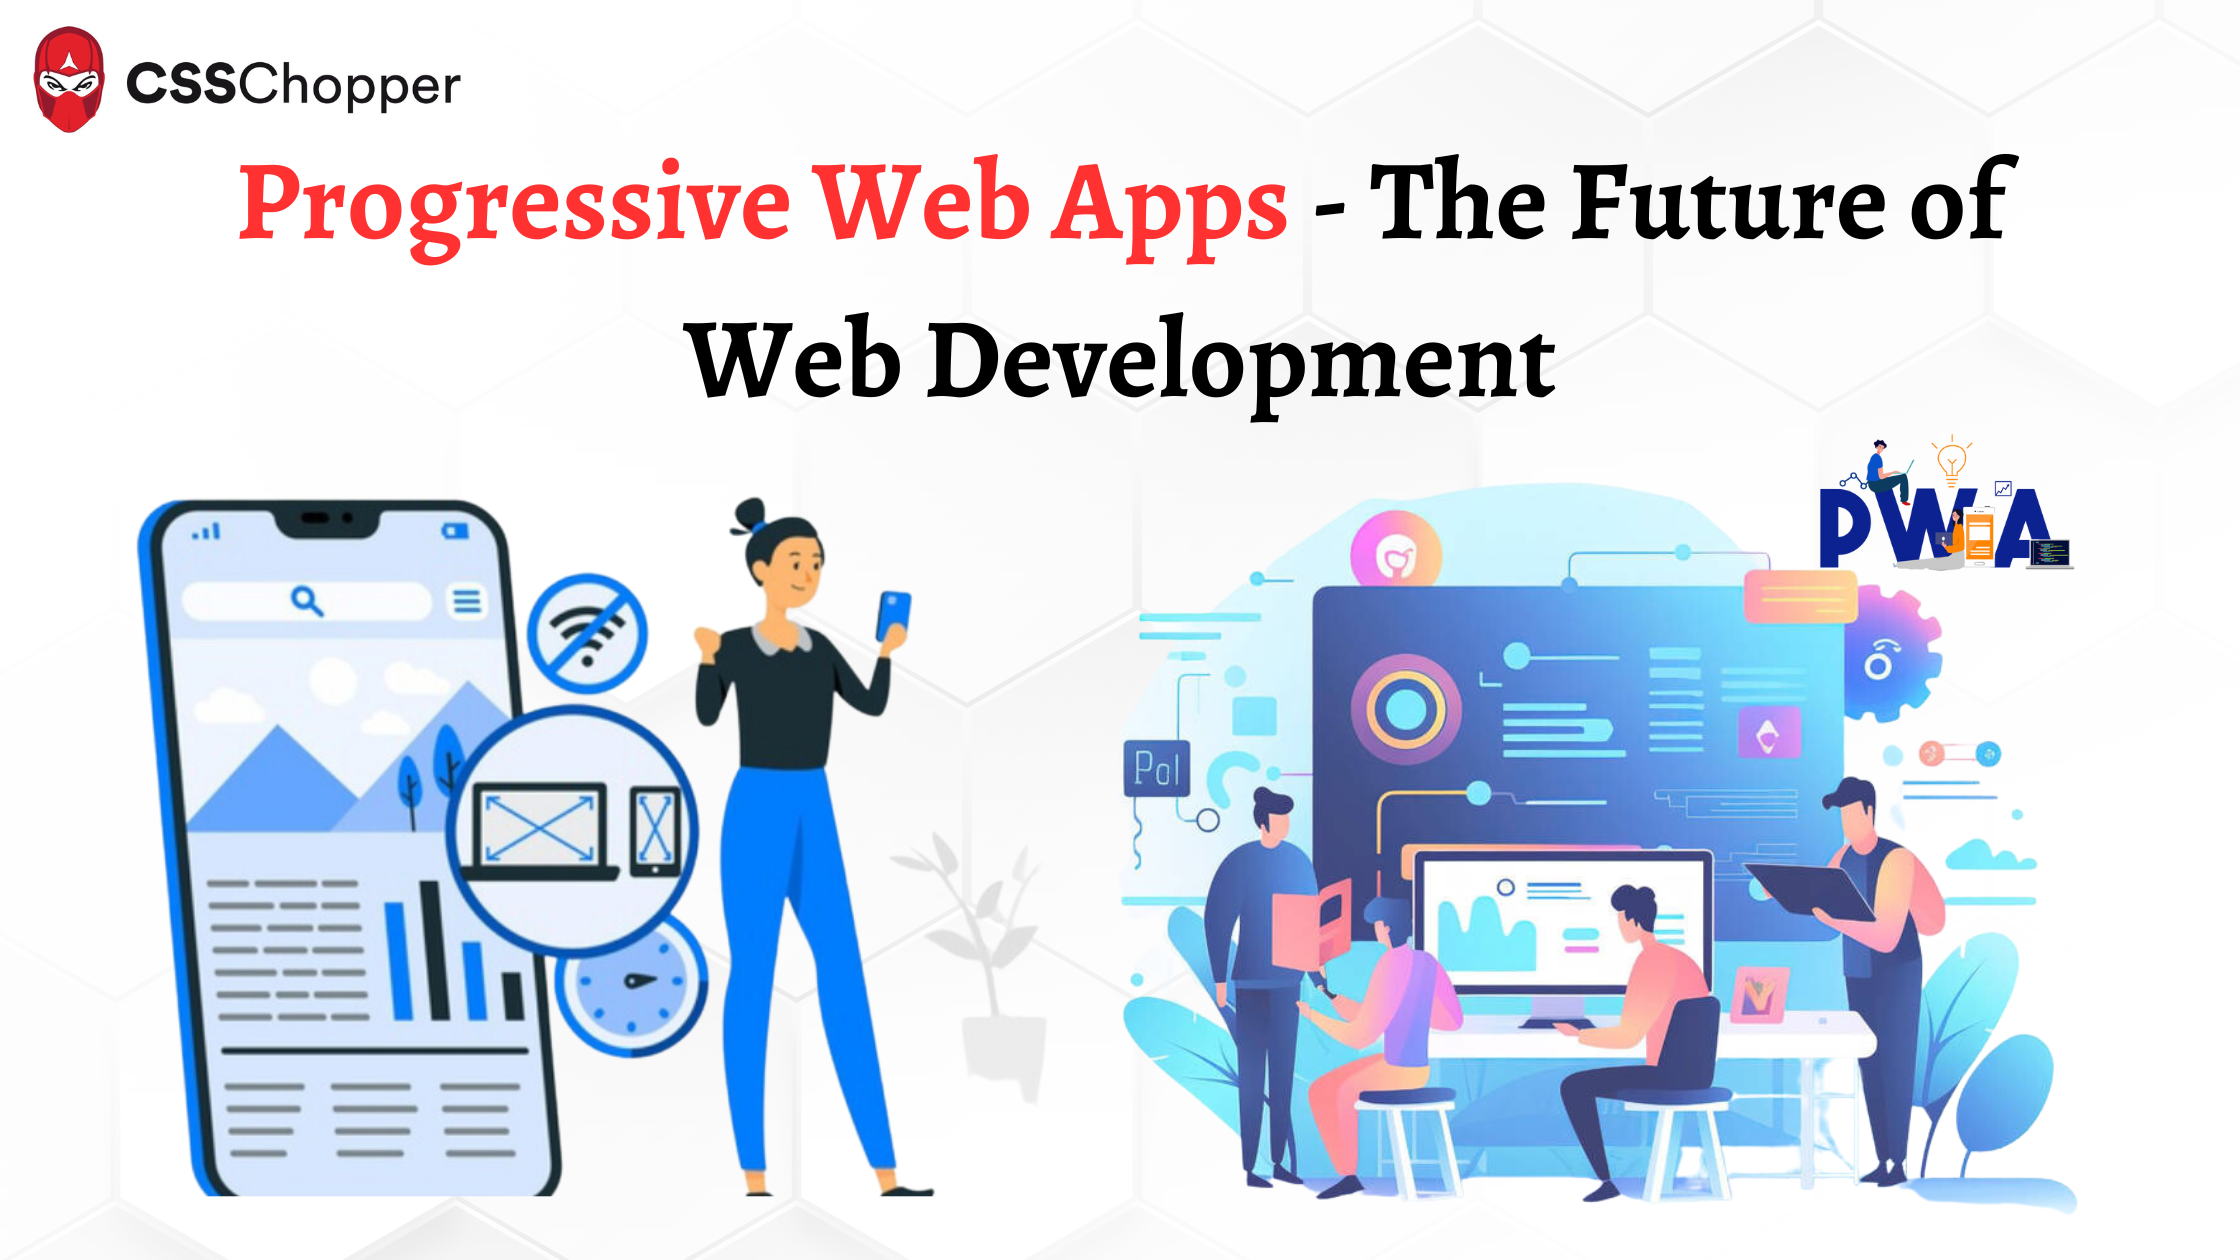 Progressive Web Apps (PWAs): Extending the Web Experience Beyond the Browser